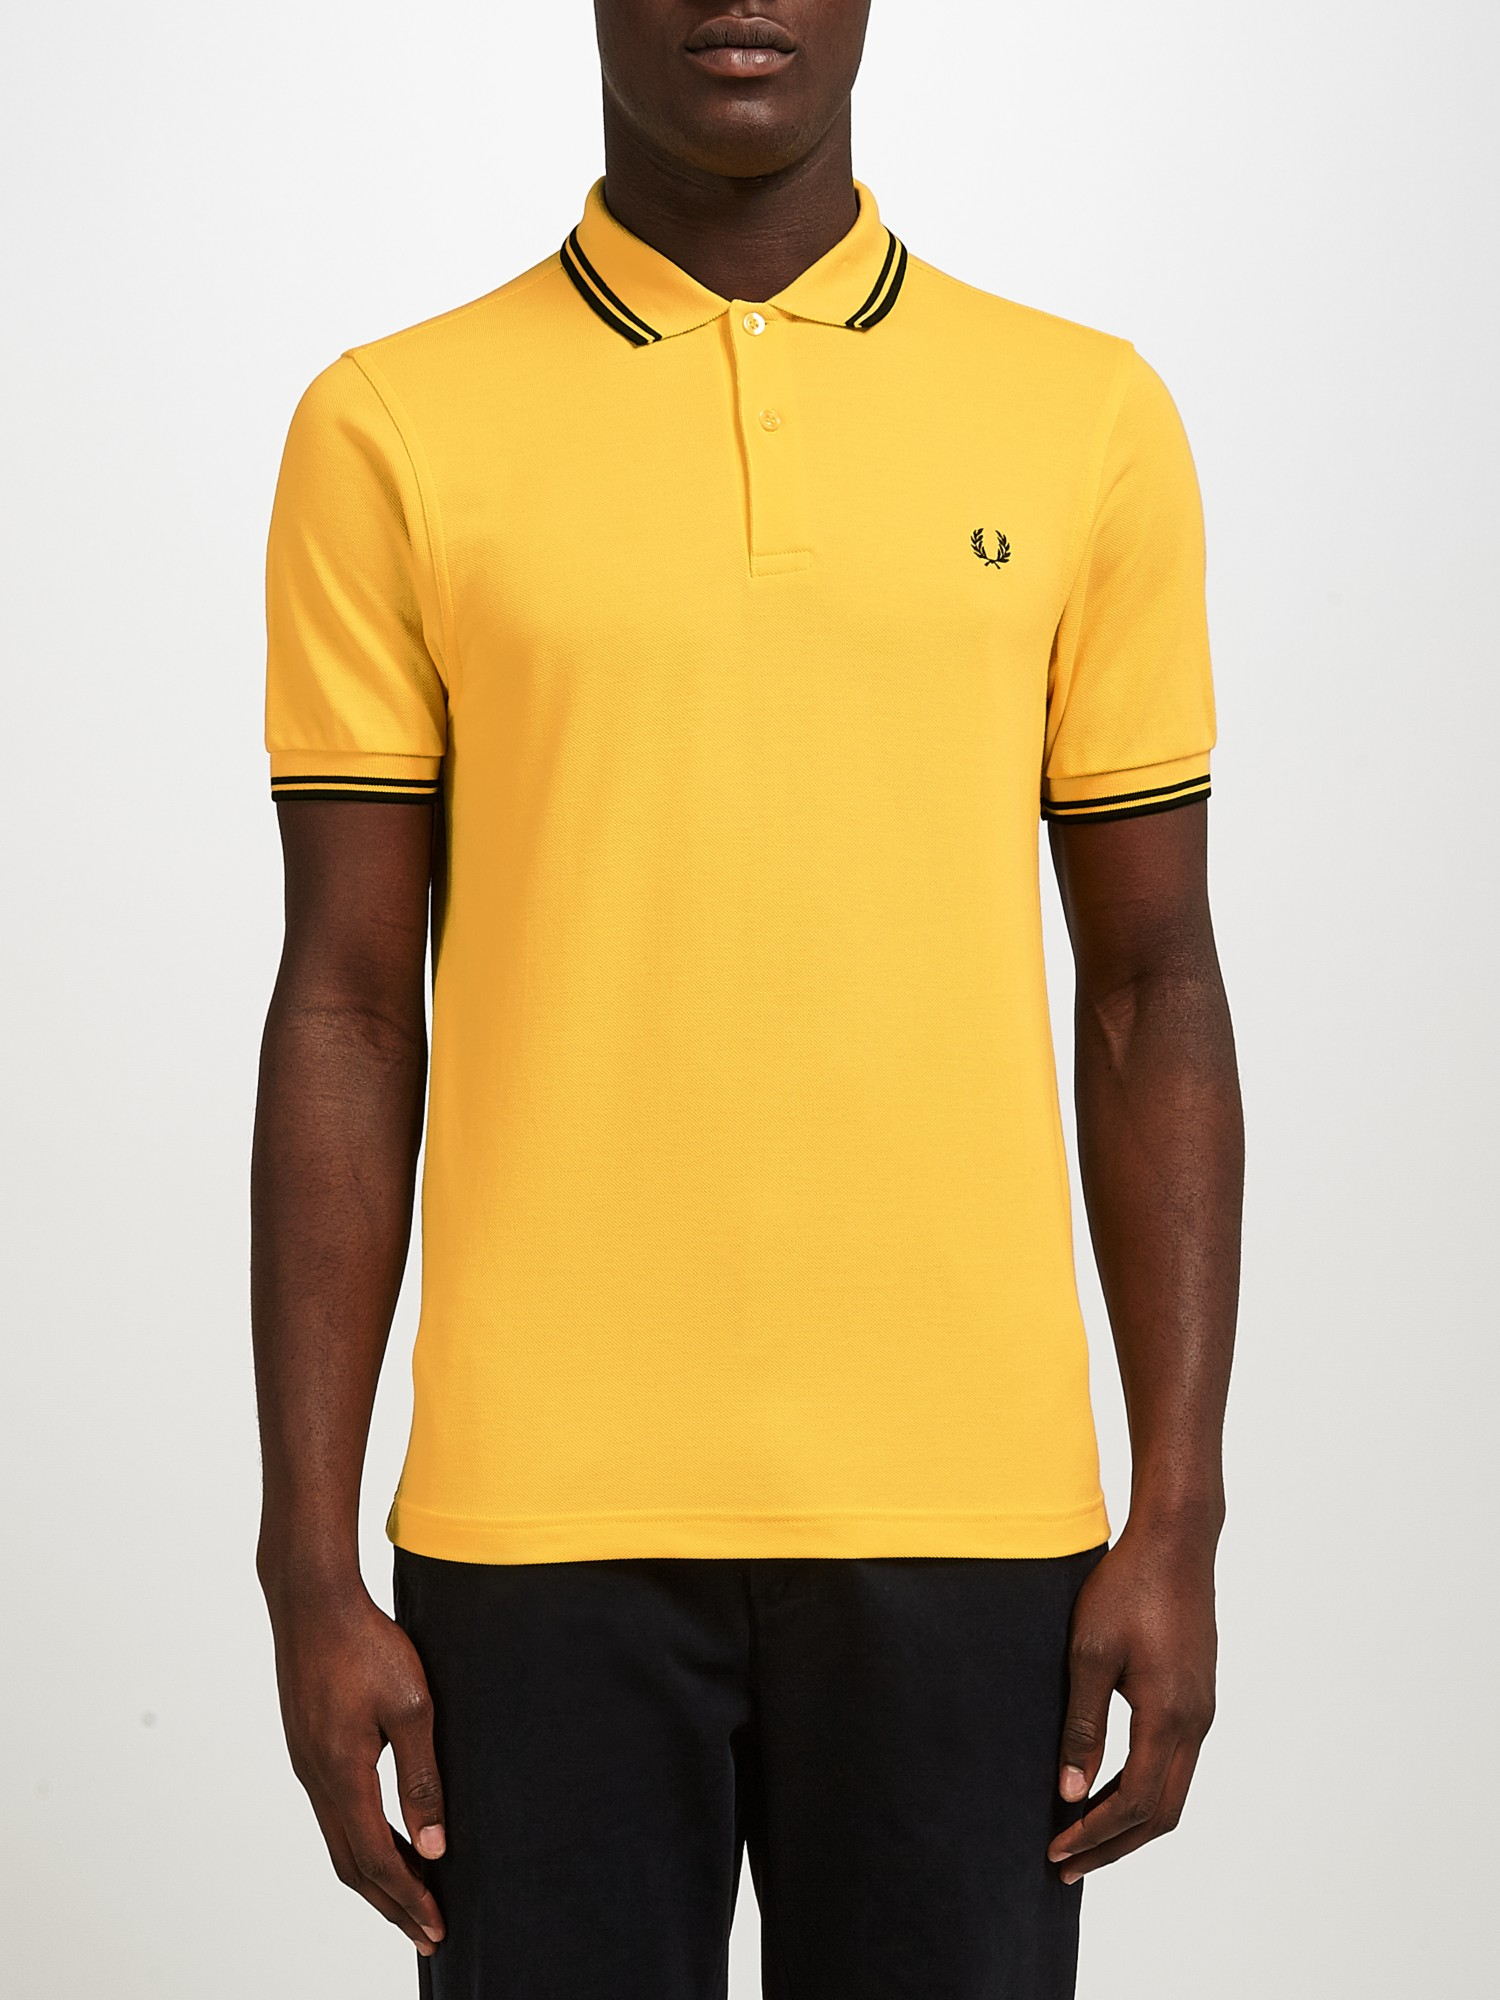 Fred Perry Twin Tipped Polo Shirt in Mustard Yellow (Yellow) for Men - Lyst